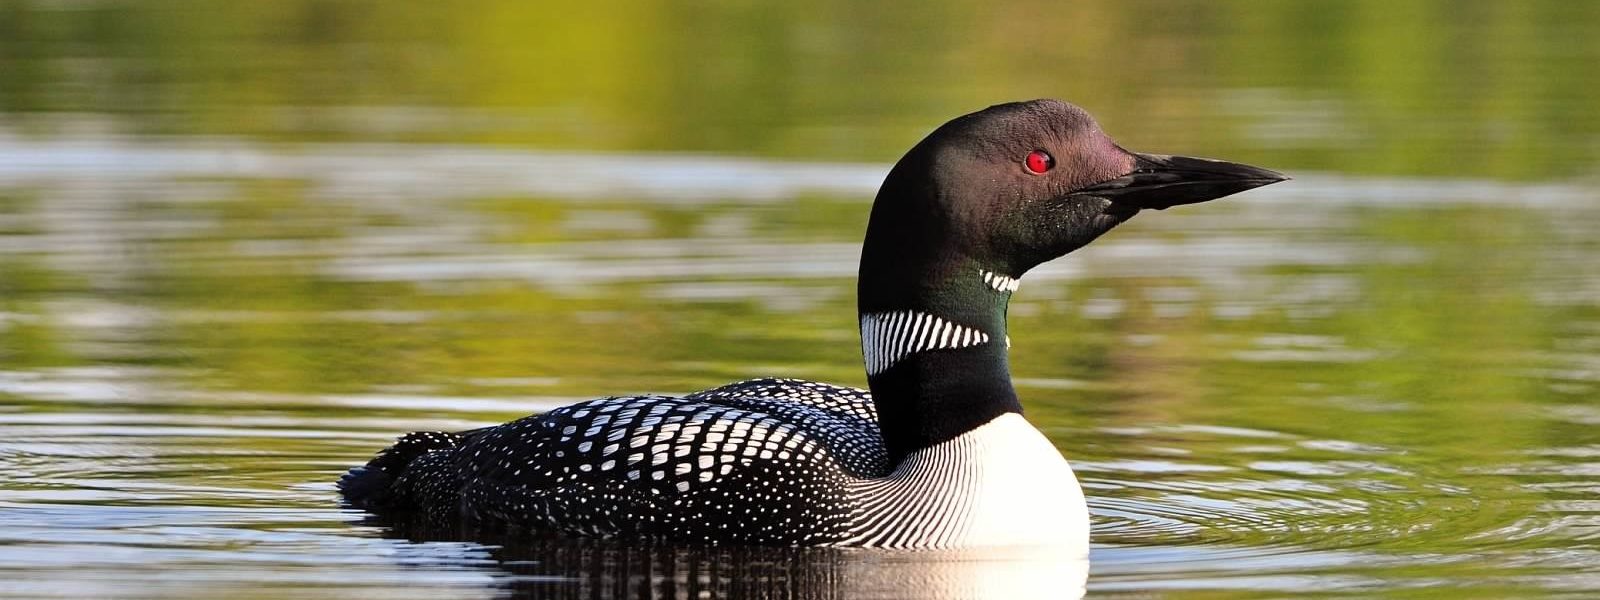 Loon swimming in water.